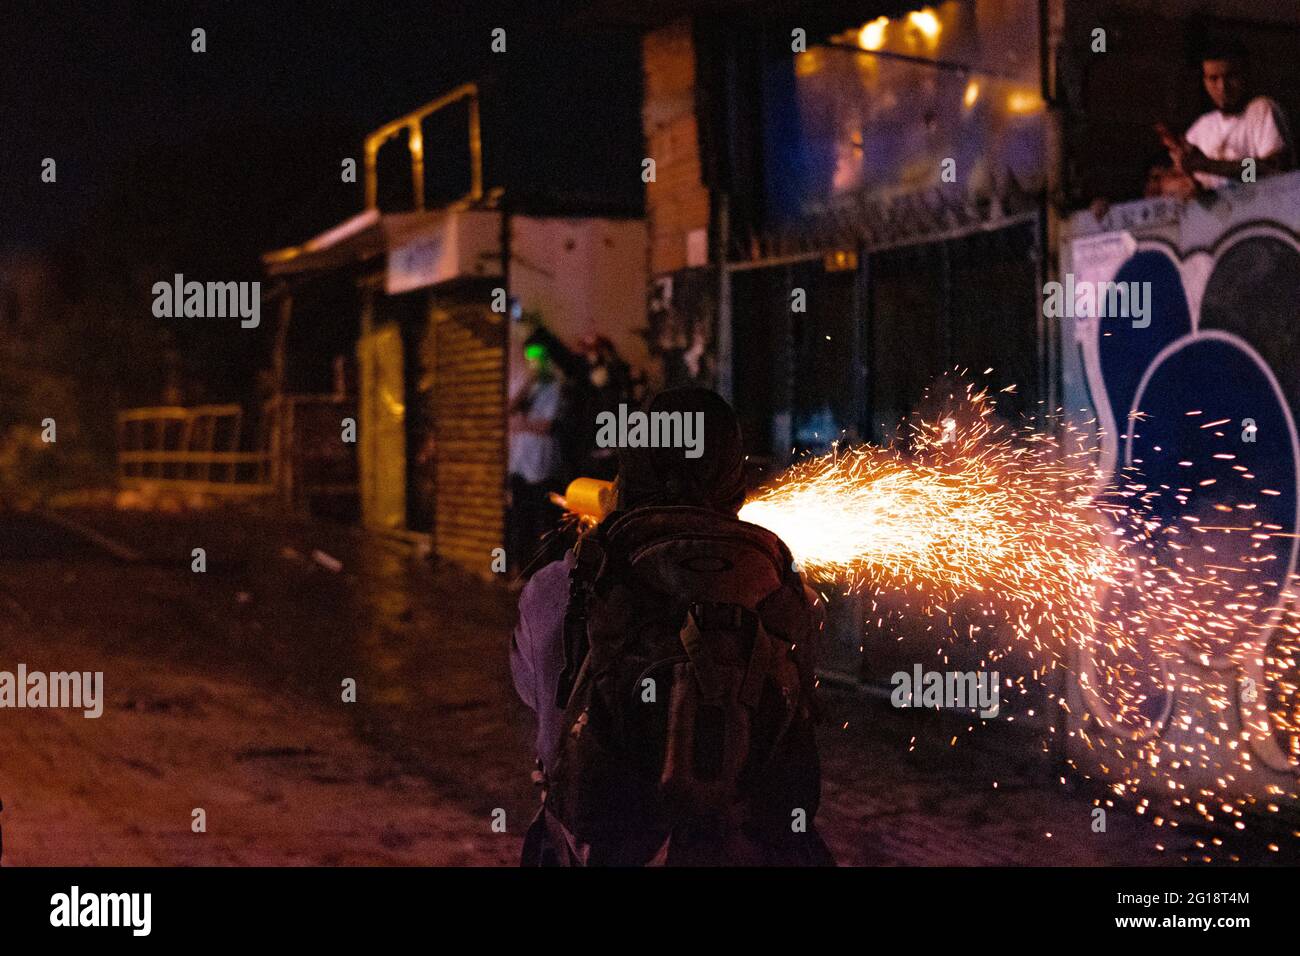 as clashes between demonstrators and Colombia's riot police (ESMAD) erupt in Medellín, Colombia after several weeks of anti-government protest against President Ivan Duque's tax and health reforms and unrest and abuse of authority cases that leave at least 70 dead according to NGOs on June 4, 2021. Stock Photo